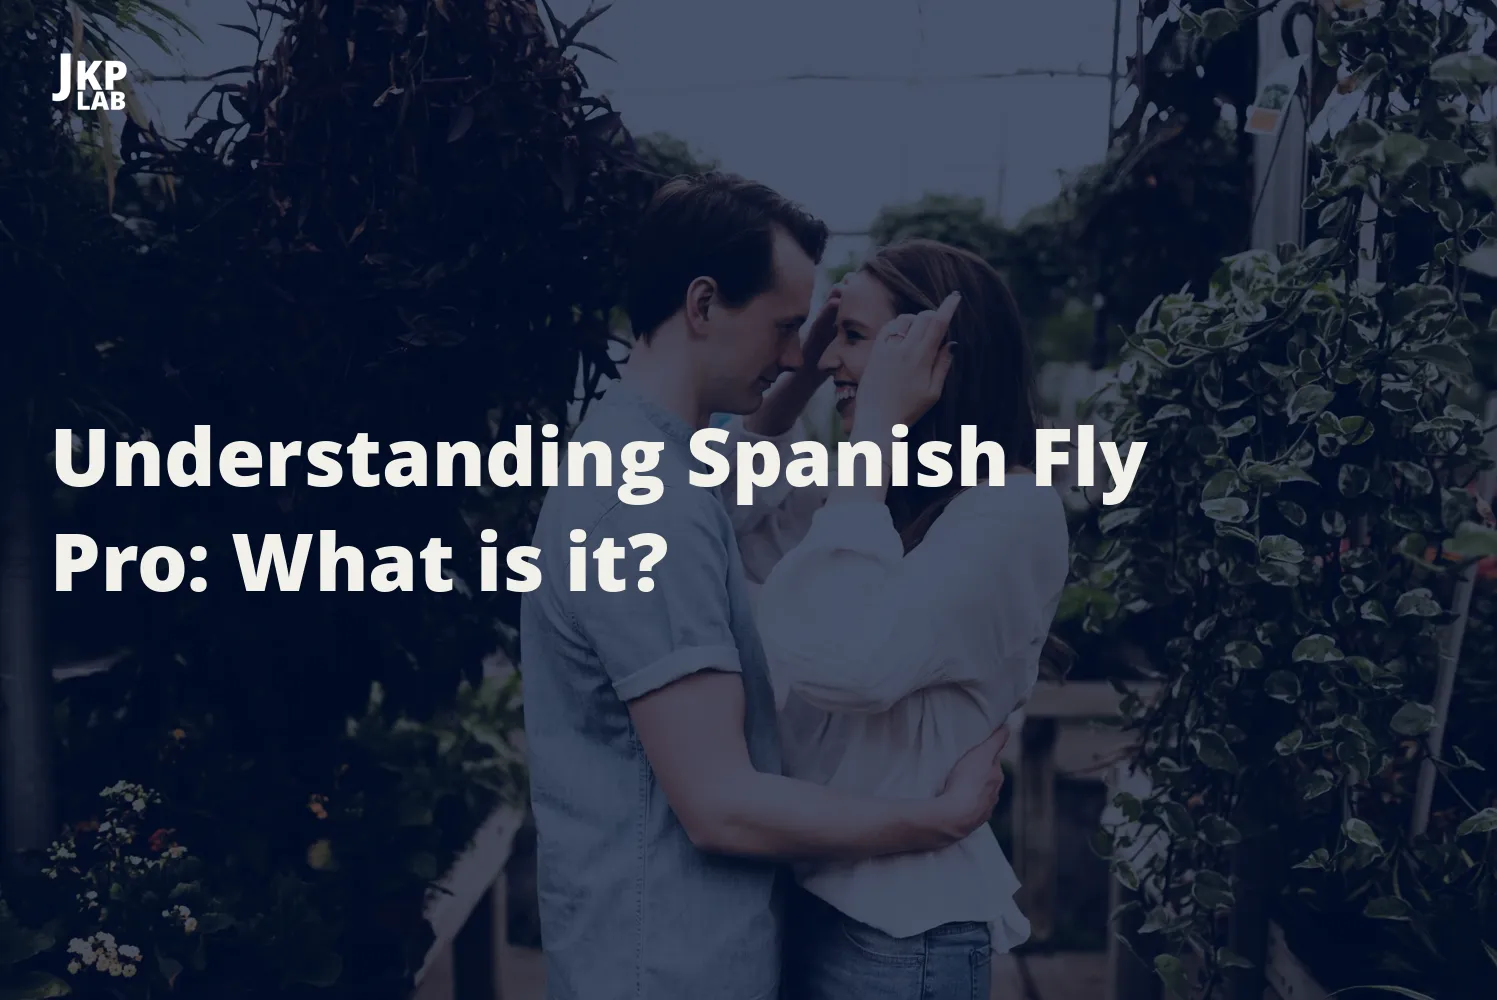 The Impact of Dosage: How Much Spanish Fly is Too Much?